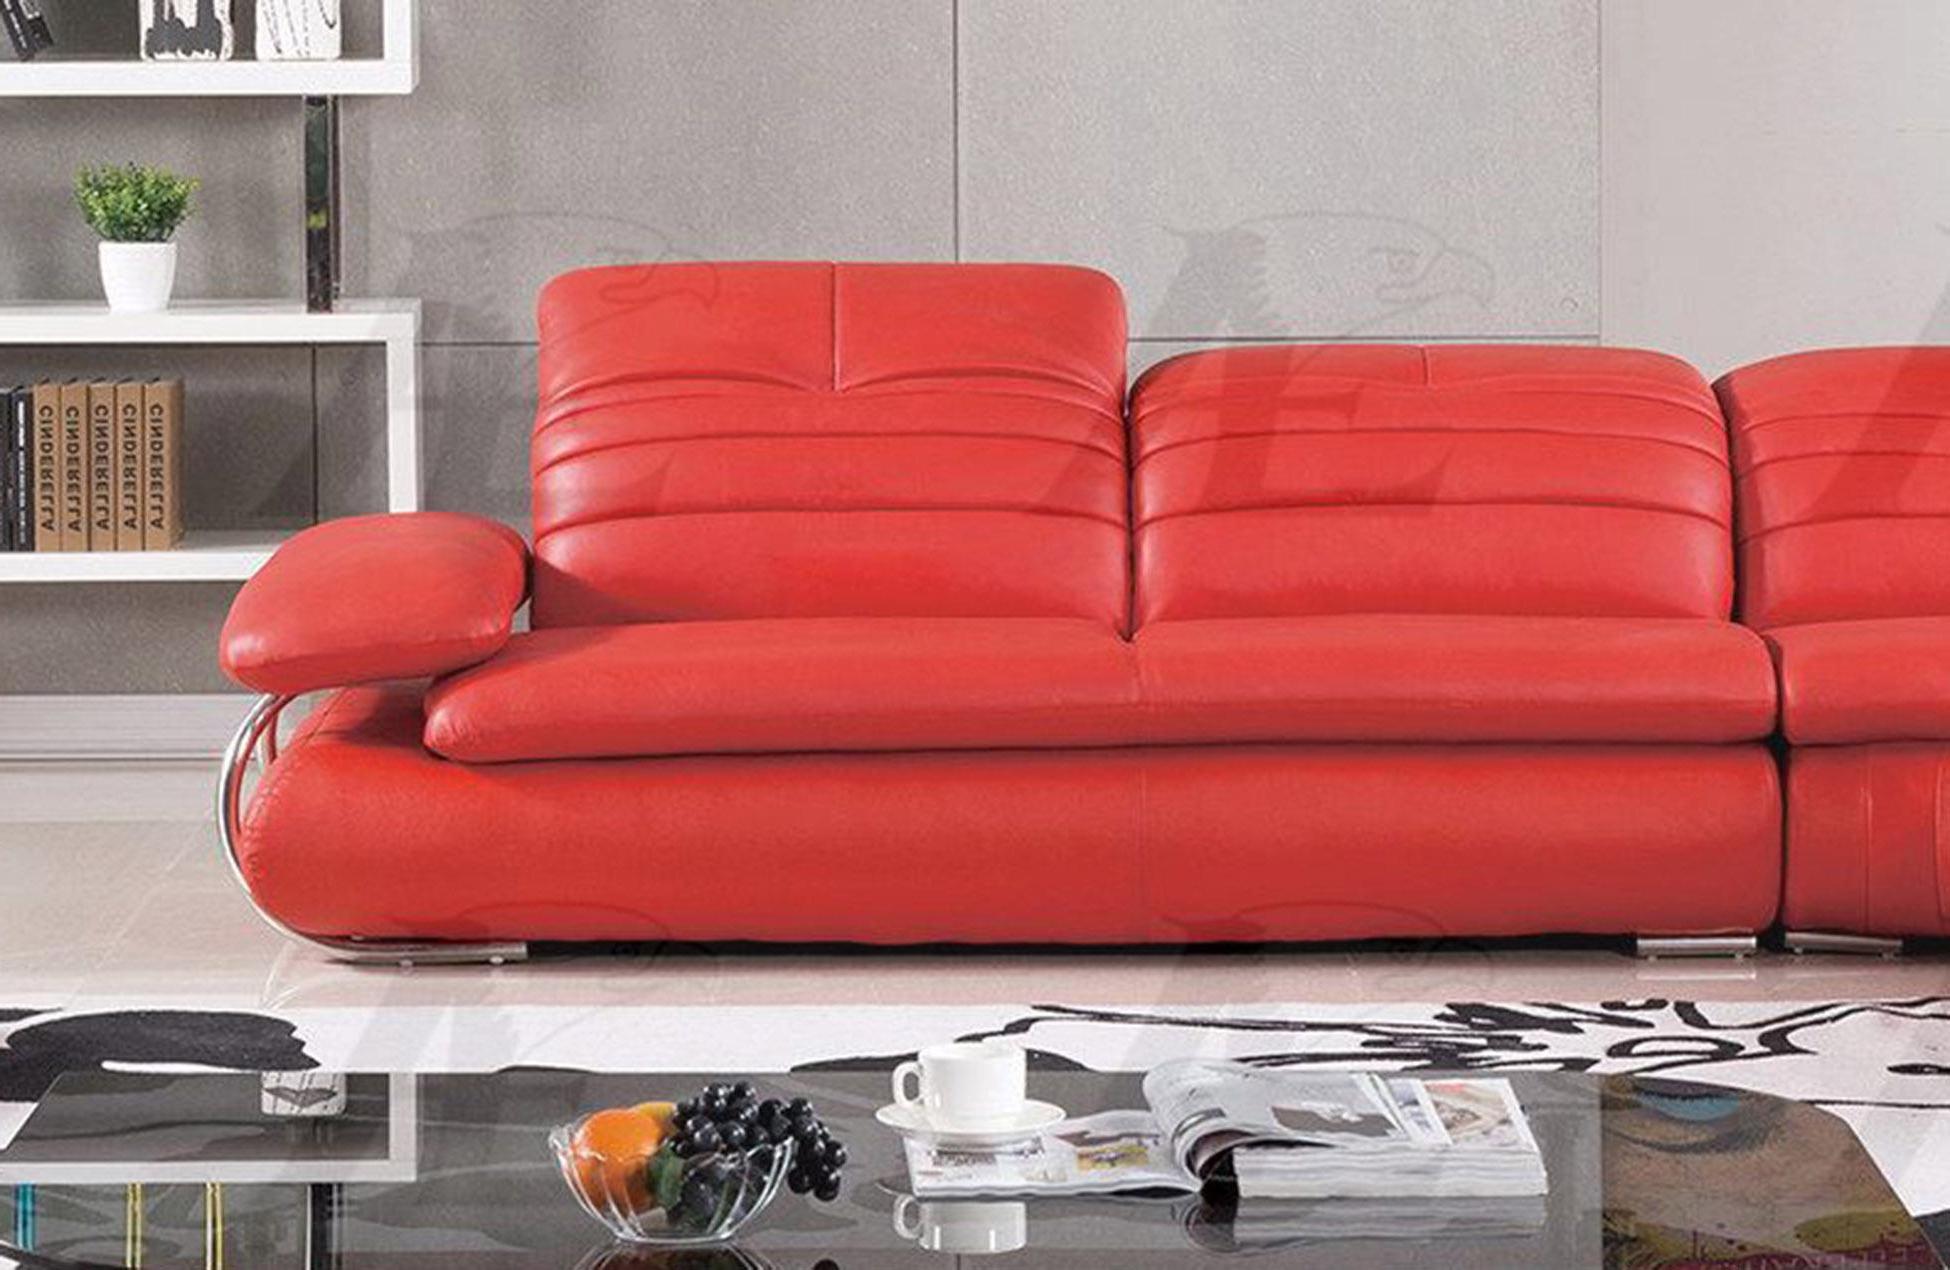 

                    
American Eagle Furniture EK-LB119-RED Sofa Chaise Coffe Table and 2 Ottomans Set Red Genuine Leather Purchase 
